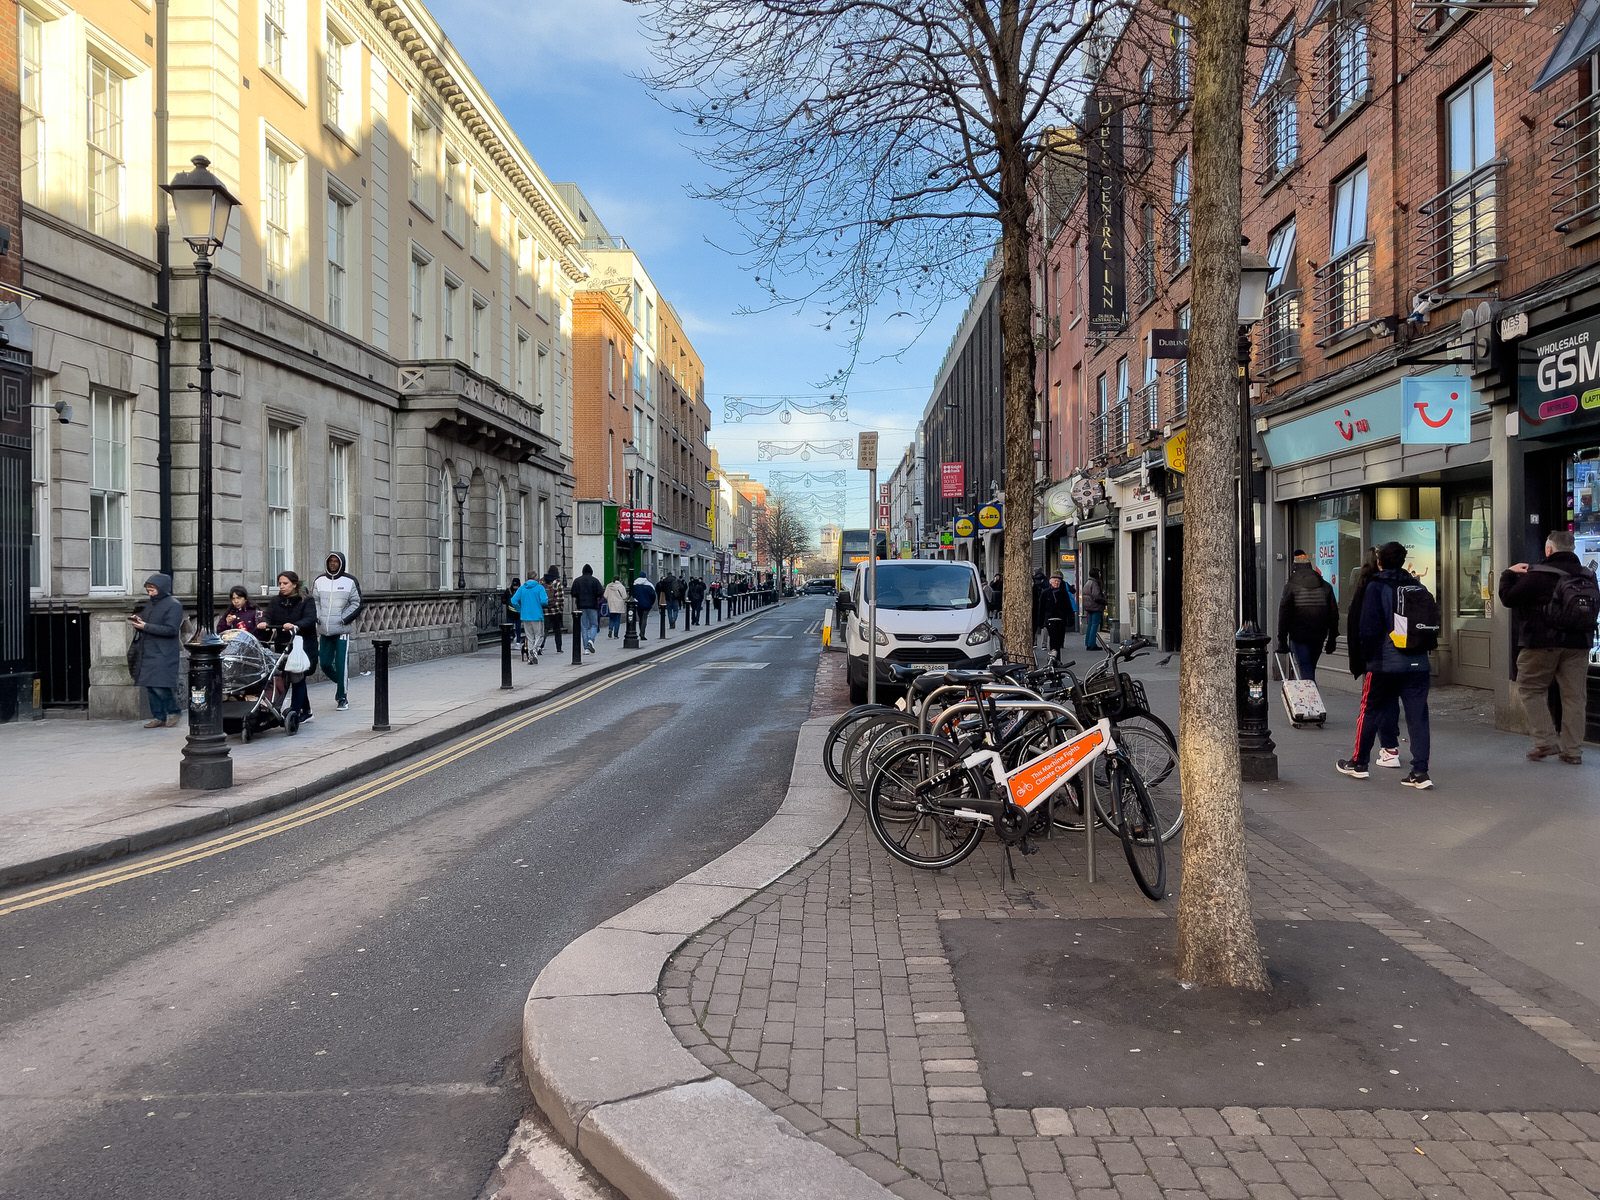 TALBOT STREET [FAILS TO MEET ITS POTENTIAL AS A MAJOR SHOPPING STREET]-225720-1